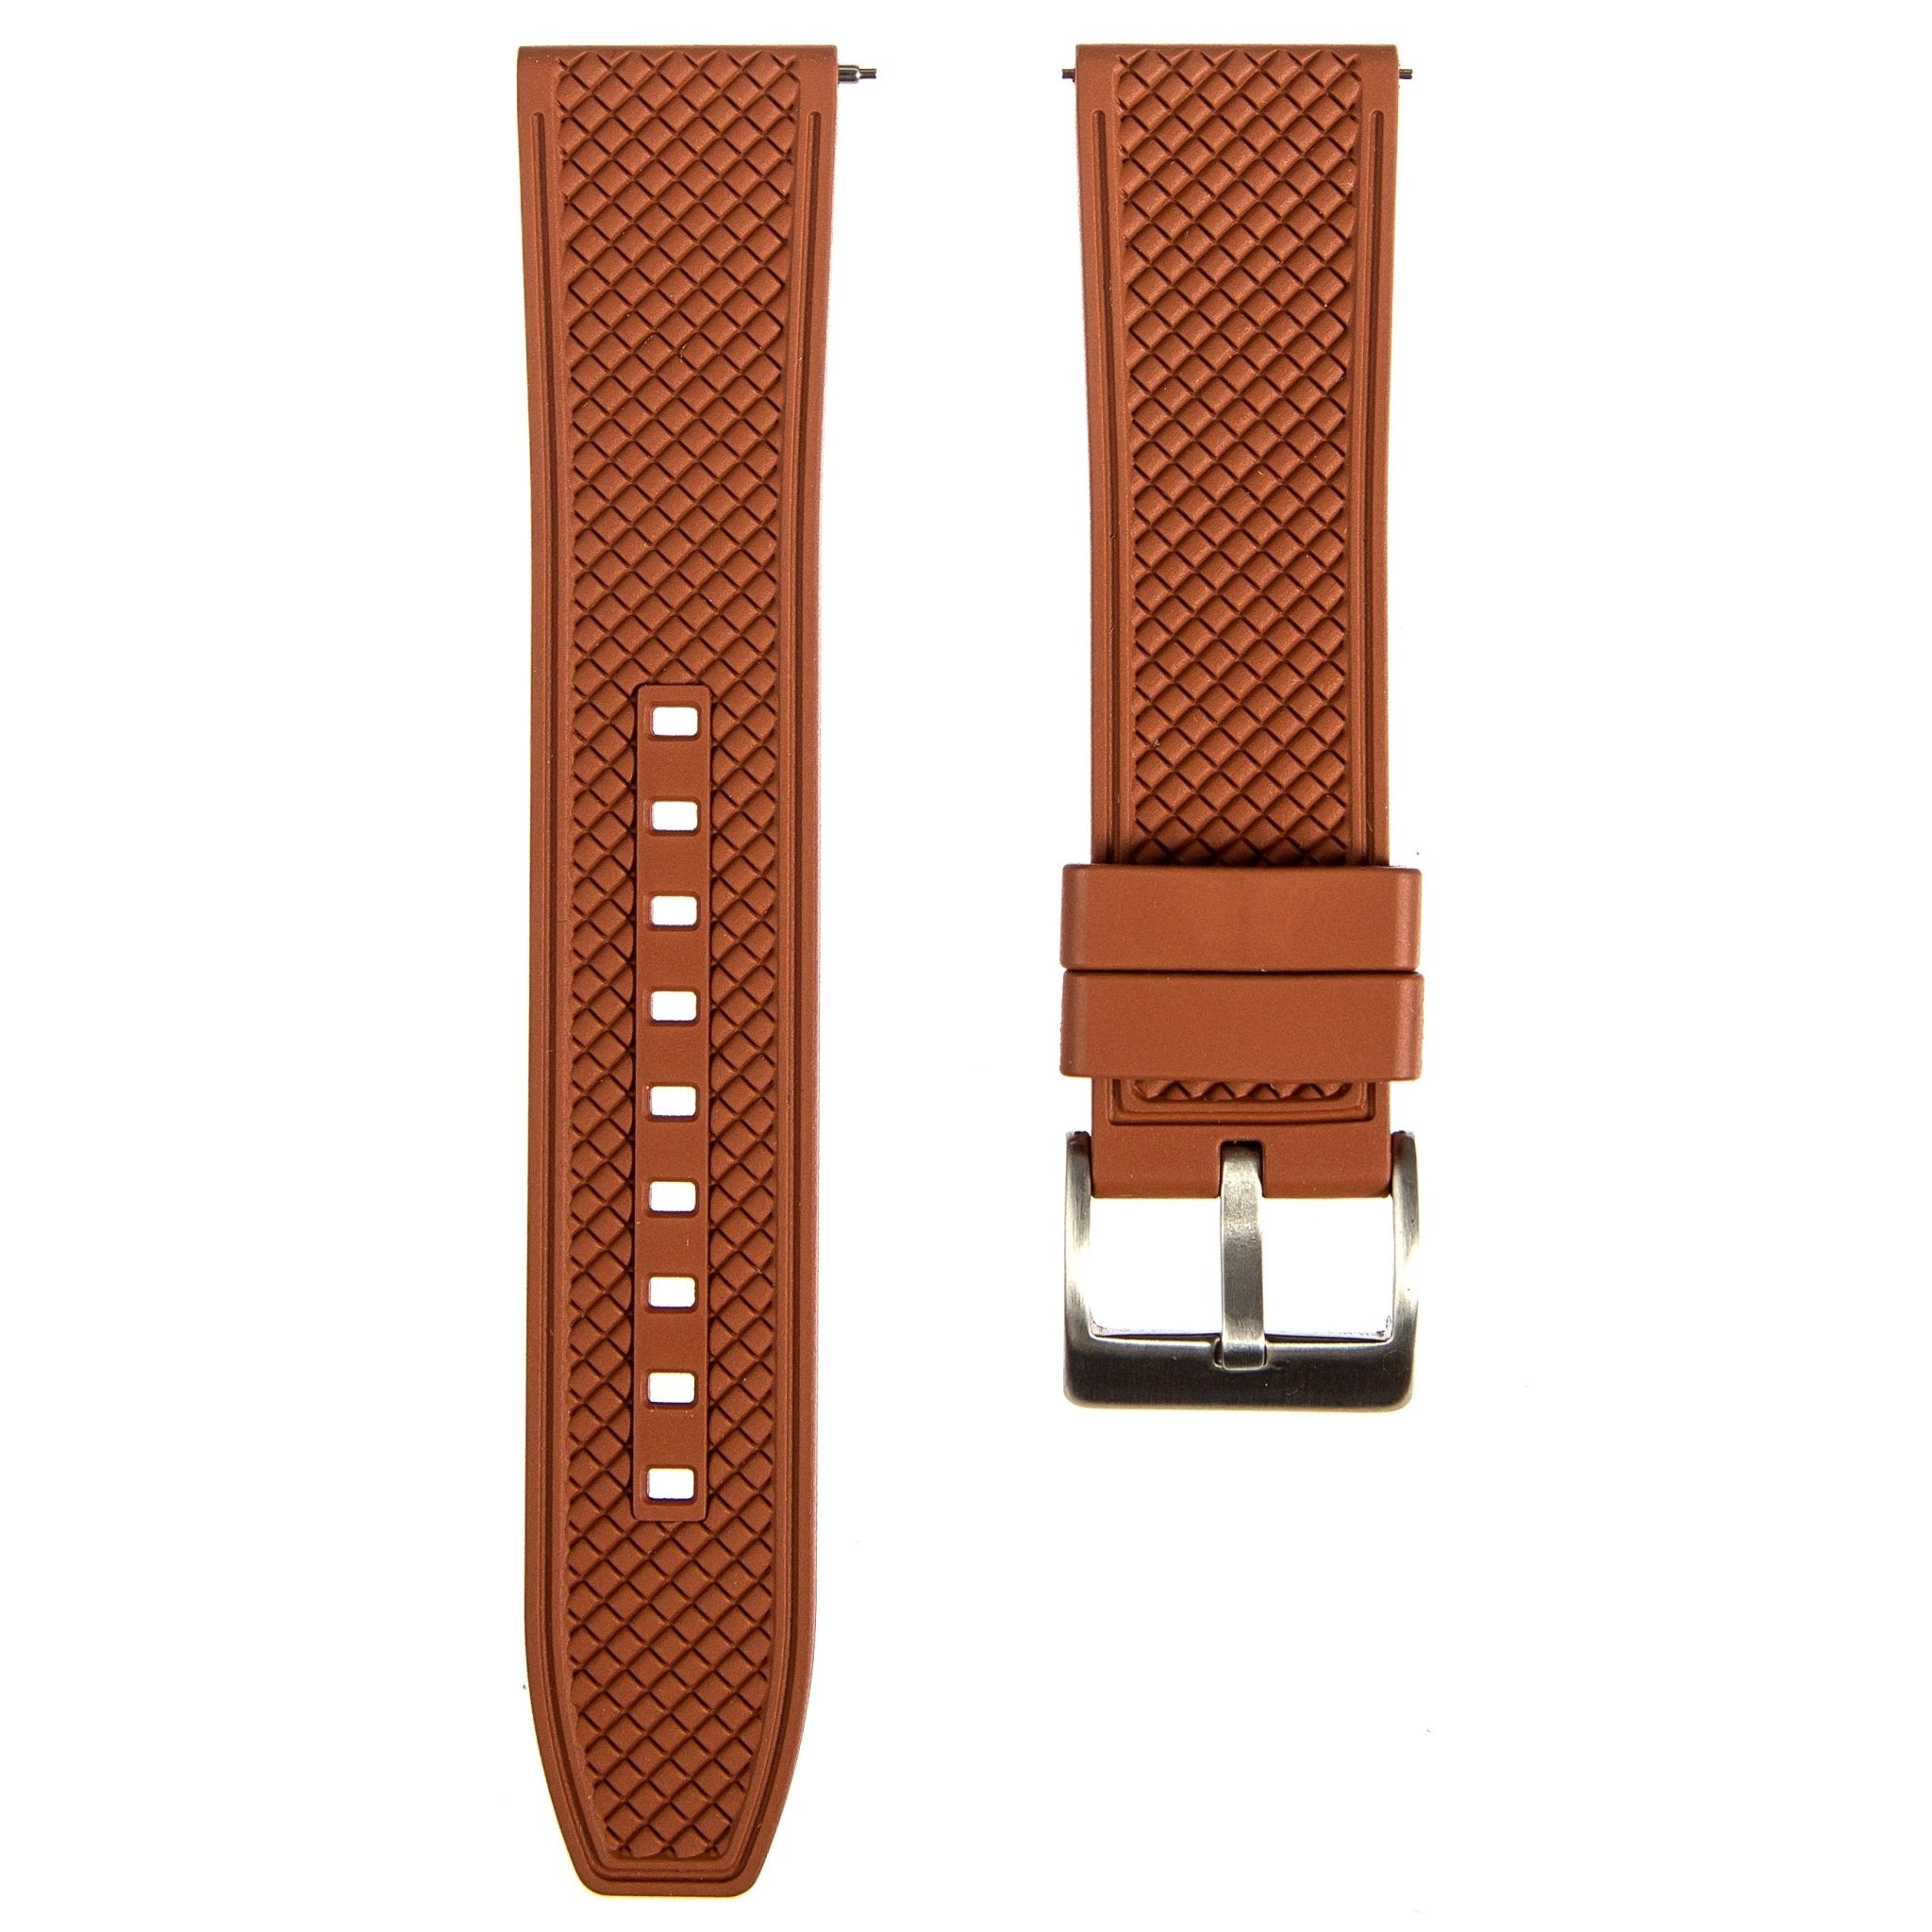 Checker Vulcanised FKM Rubber Strap-Quick-Release – Compatible with Omega Seamaster 300 – Brown (2419) -StrapSeeker